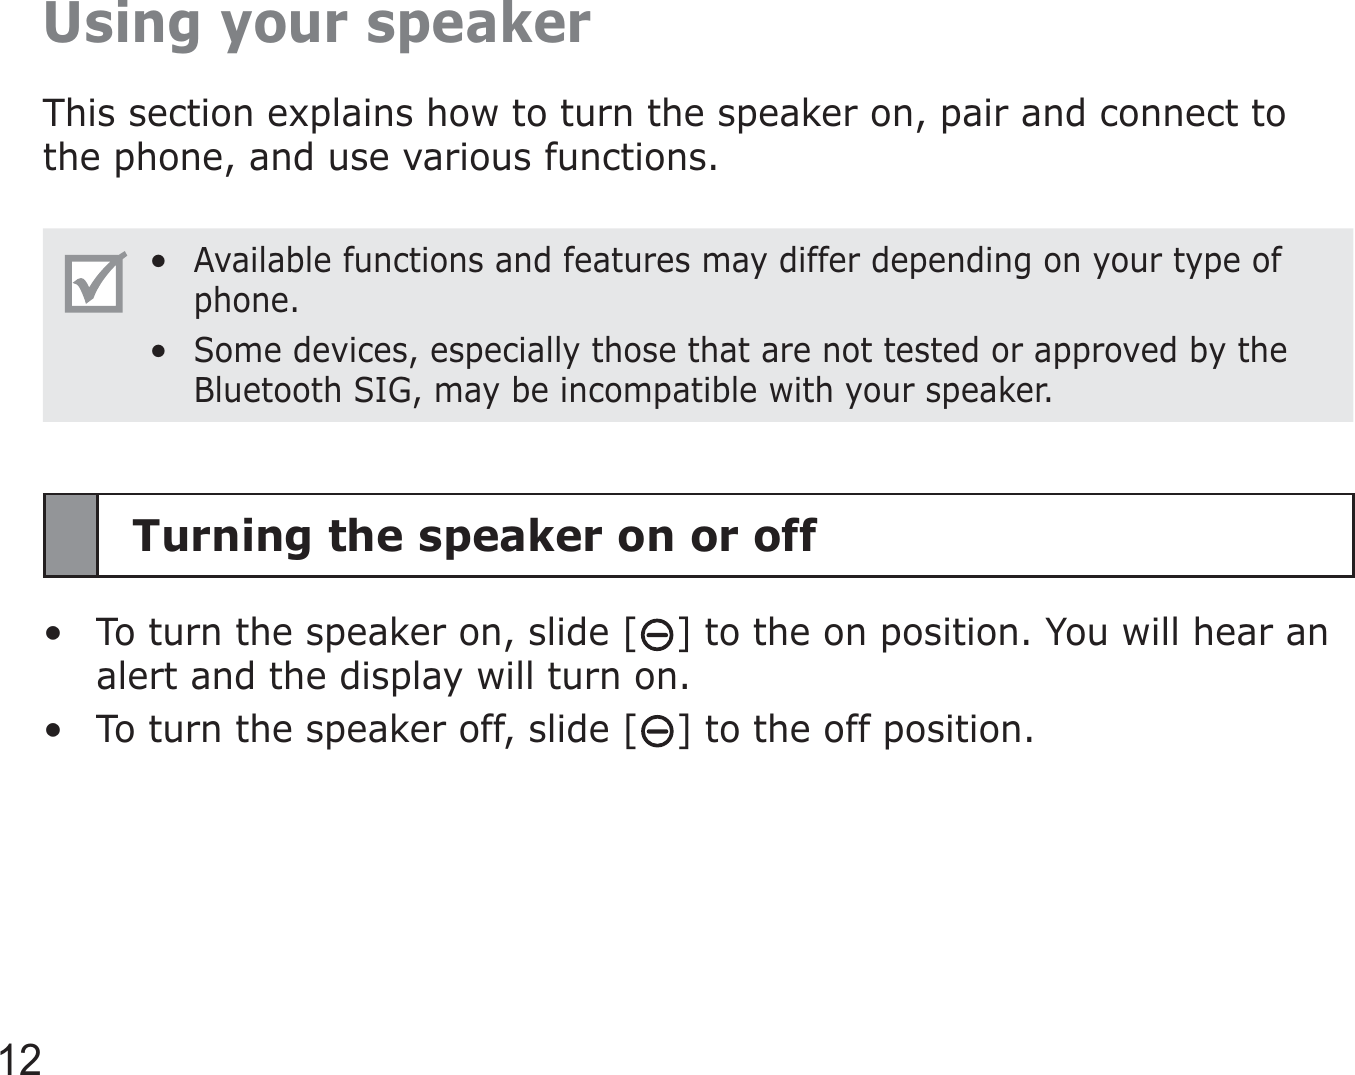 12Using your speakerThis section explains how to turn the speaker on, pair and connect to the phone, and use various functions.Available functions and features may differ depending on your type of phone.Some devices, especially those that are not tested or approved by the Bluetooth SIG, may be incompatible with your speaker.••Turning the speaker on or offTo turn the speaker on, slide [ ] to the on position. You will hear an alert and the display will turn on.To turn the speaker off, slide [ ] to the off position.••